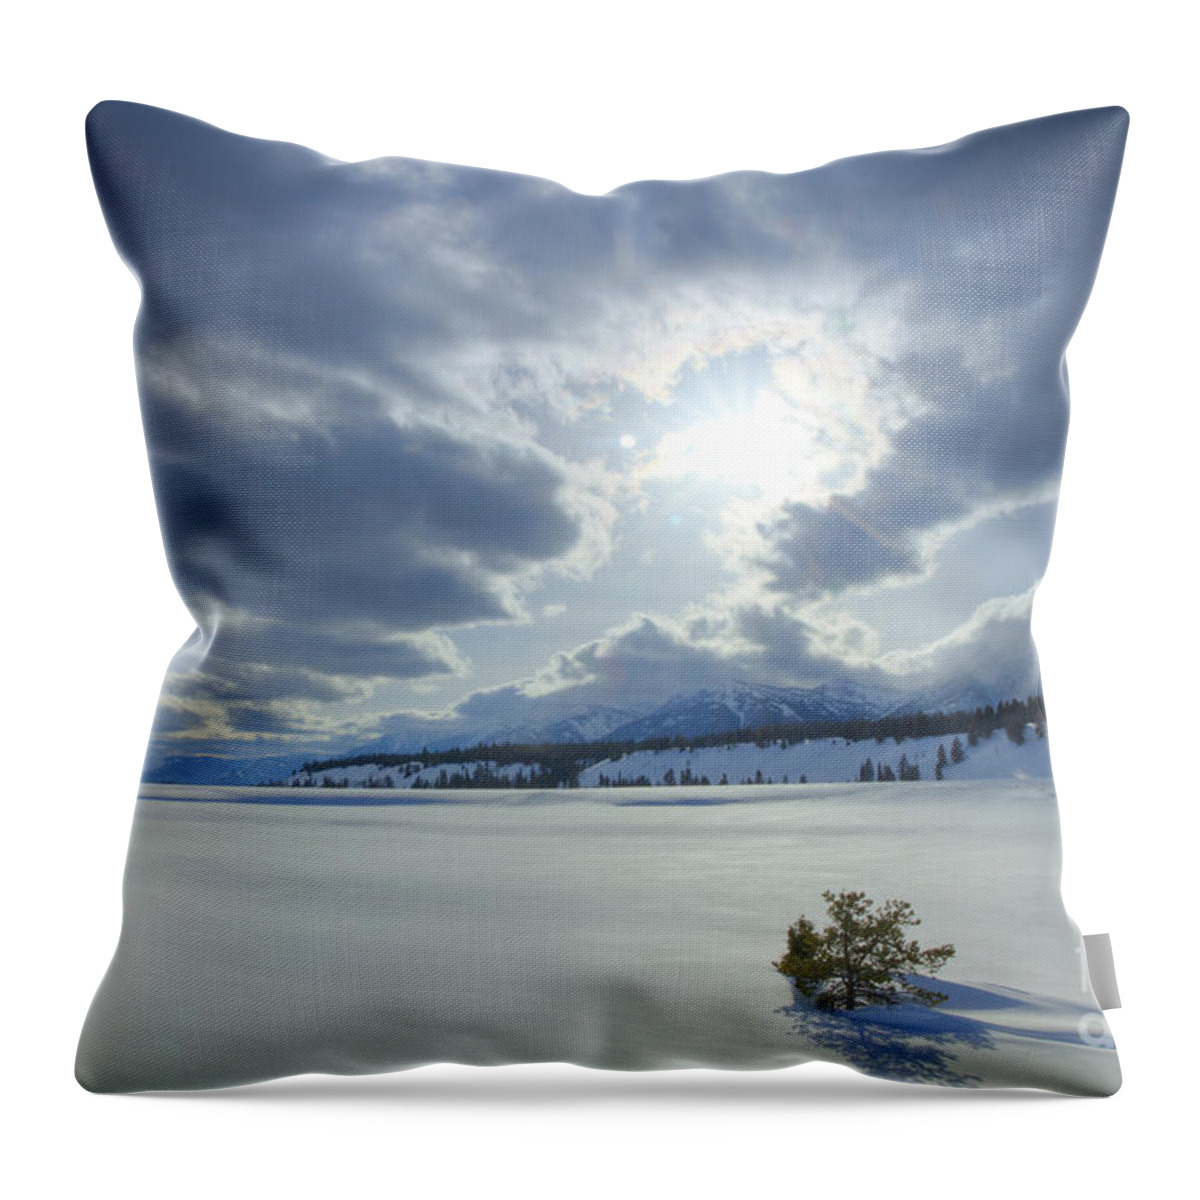 Teton Mountains Throw Pillow featuring the photograph A Winter Sky by Idaho Scenic Images Linda Lantzy